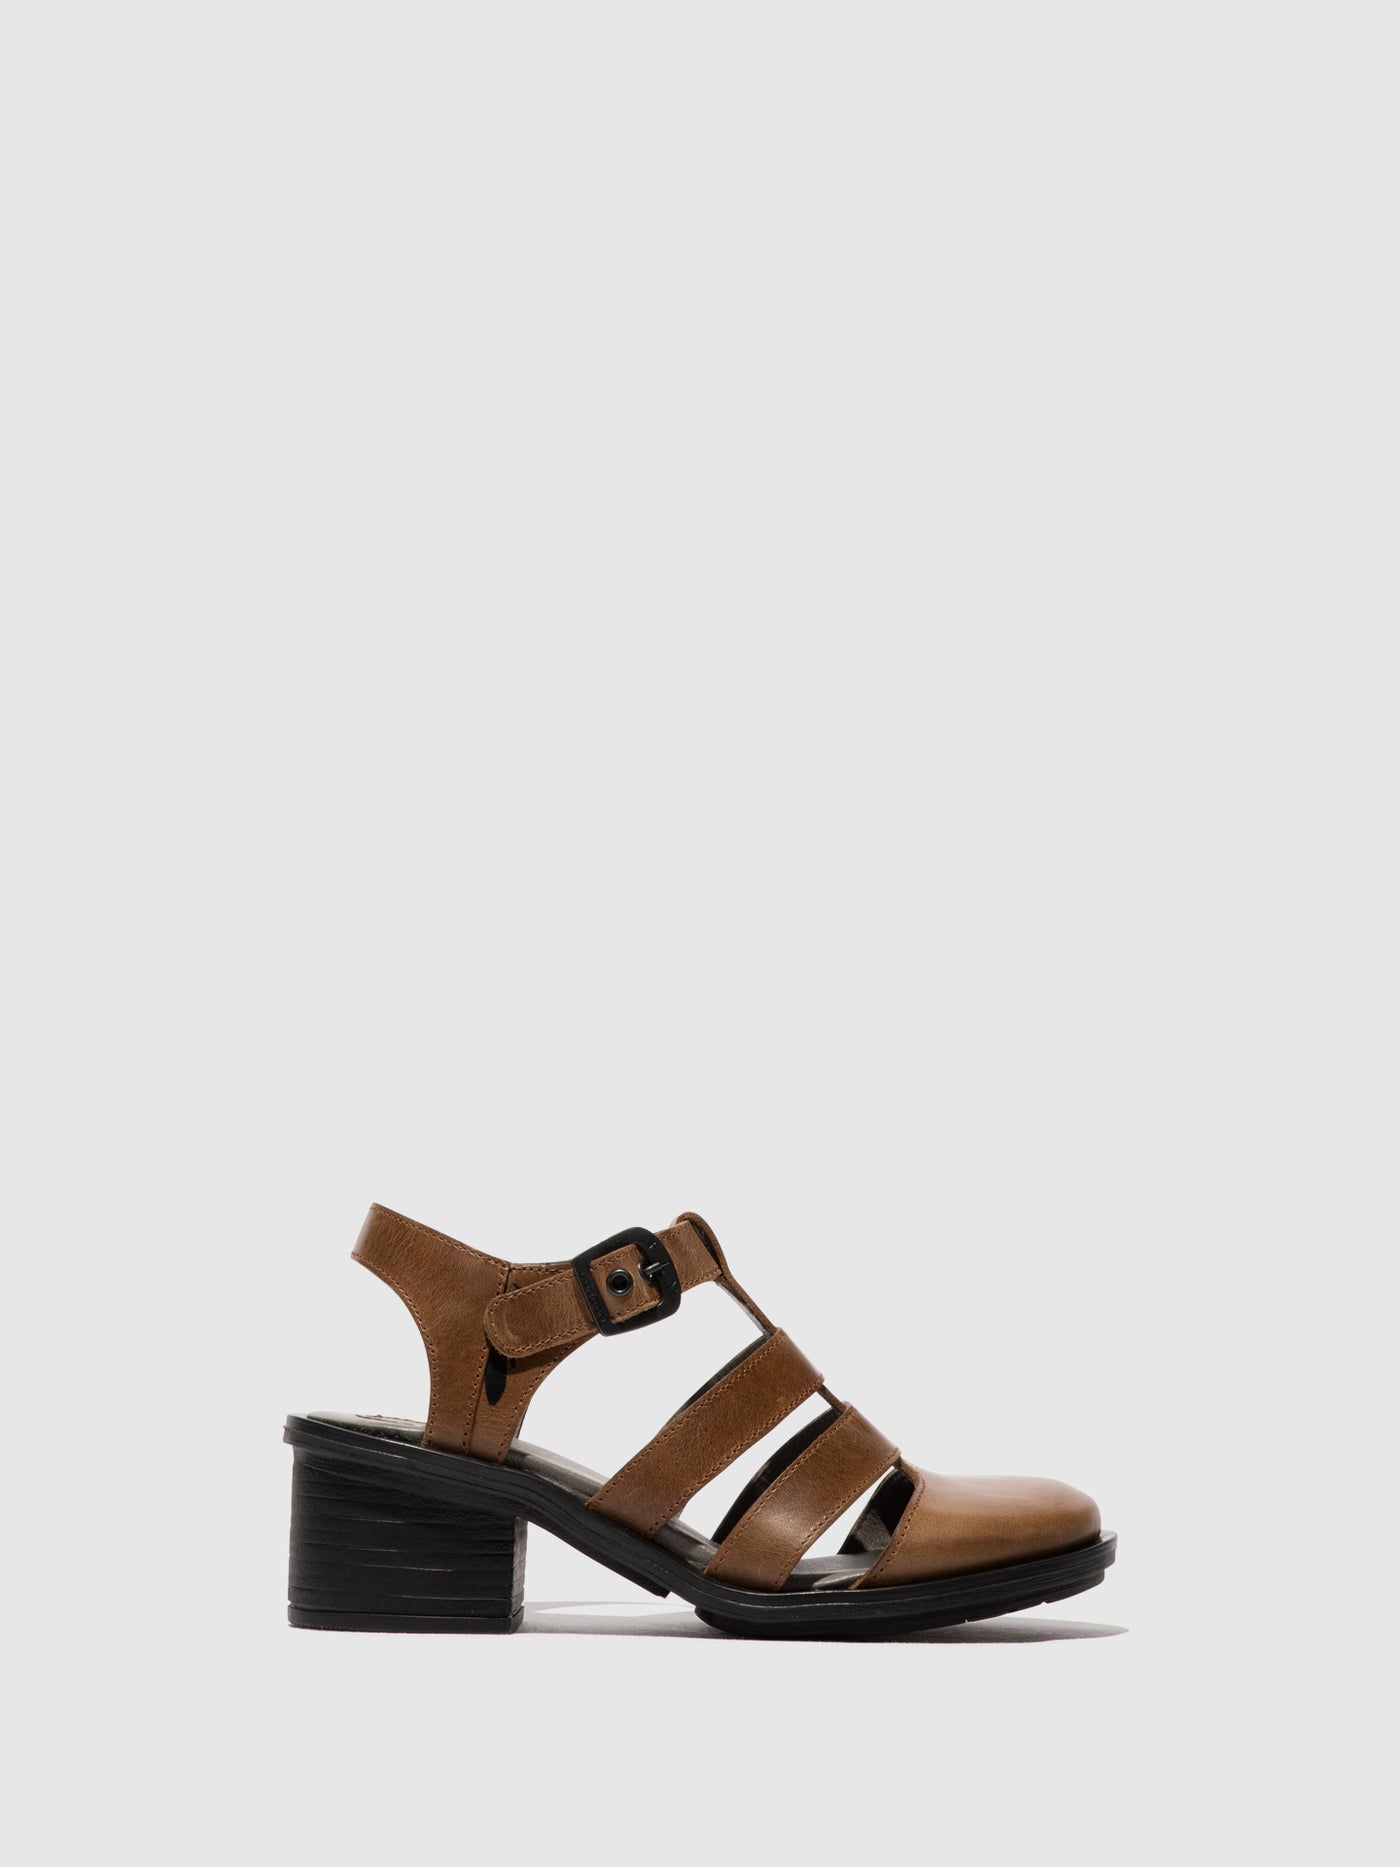 T-Strap Sandals CAHY195FLY CAMEL